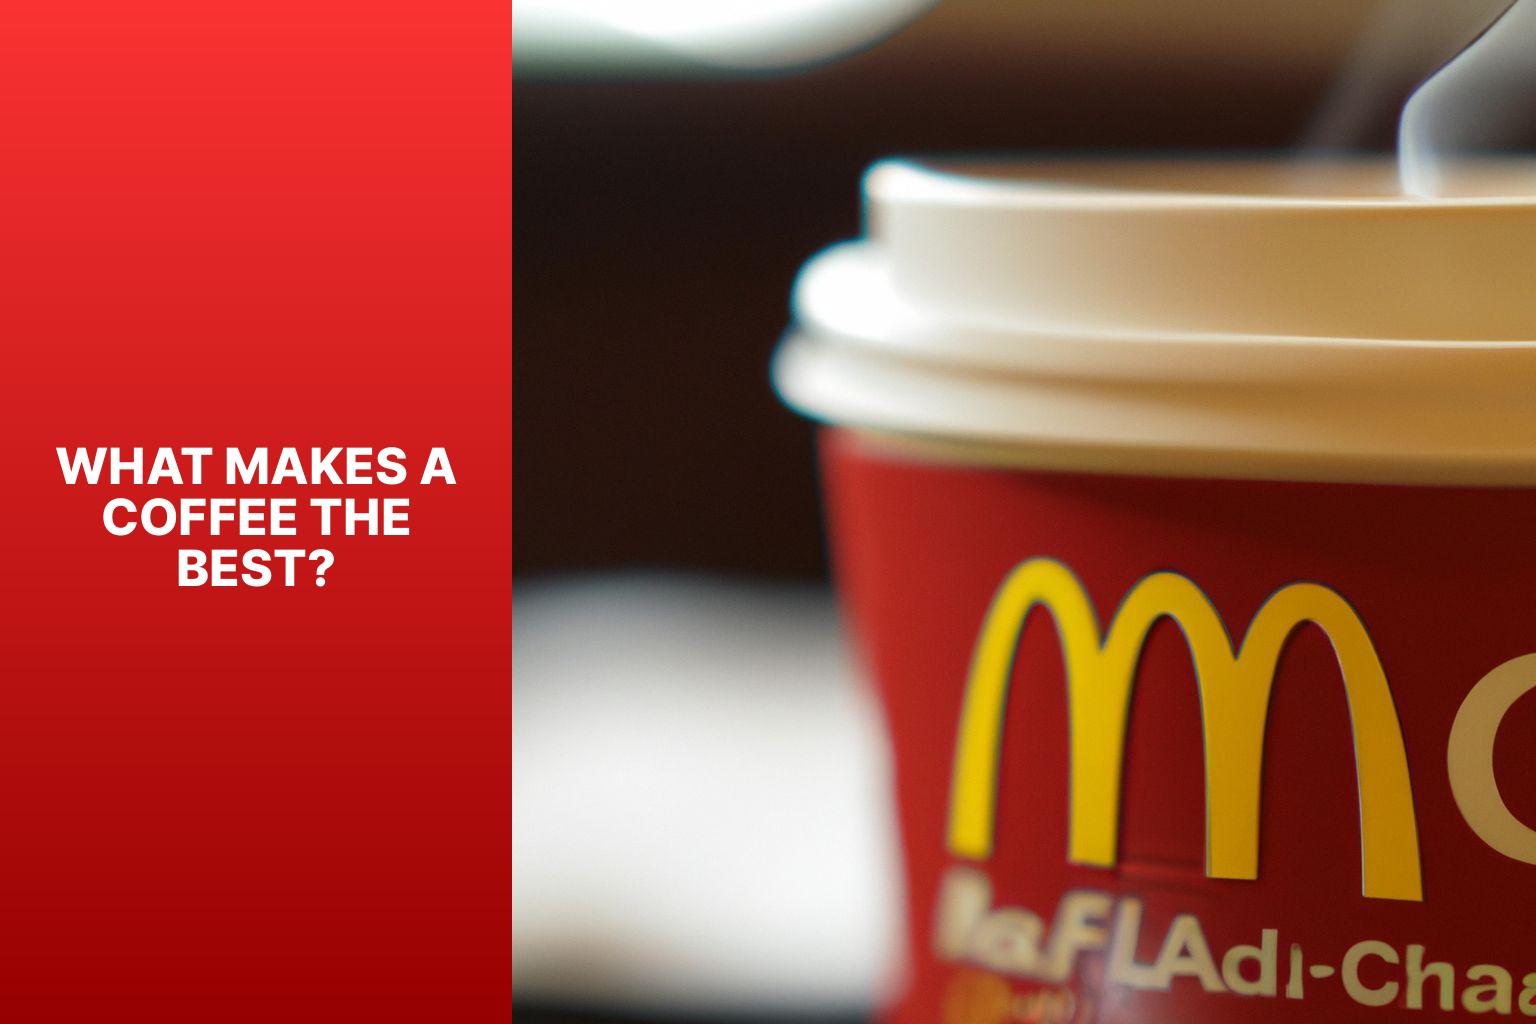 What Makes a Coffee the Best? - Best McDonald